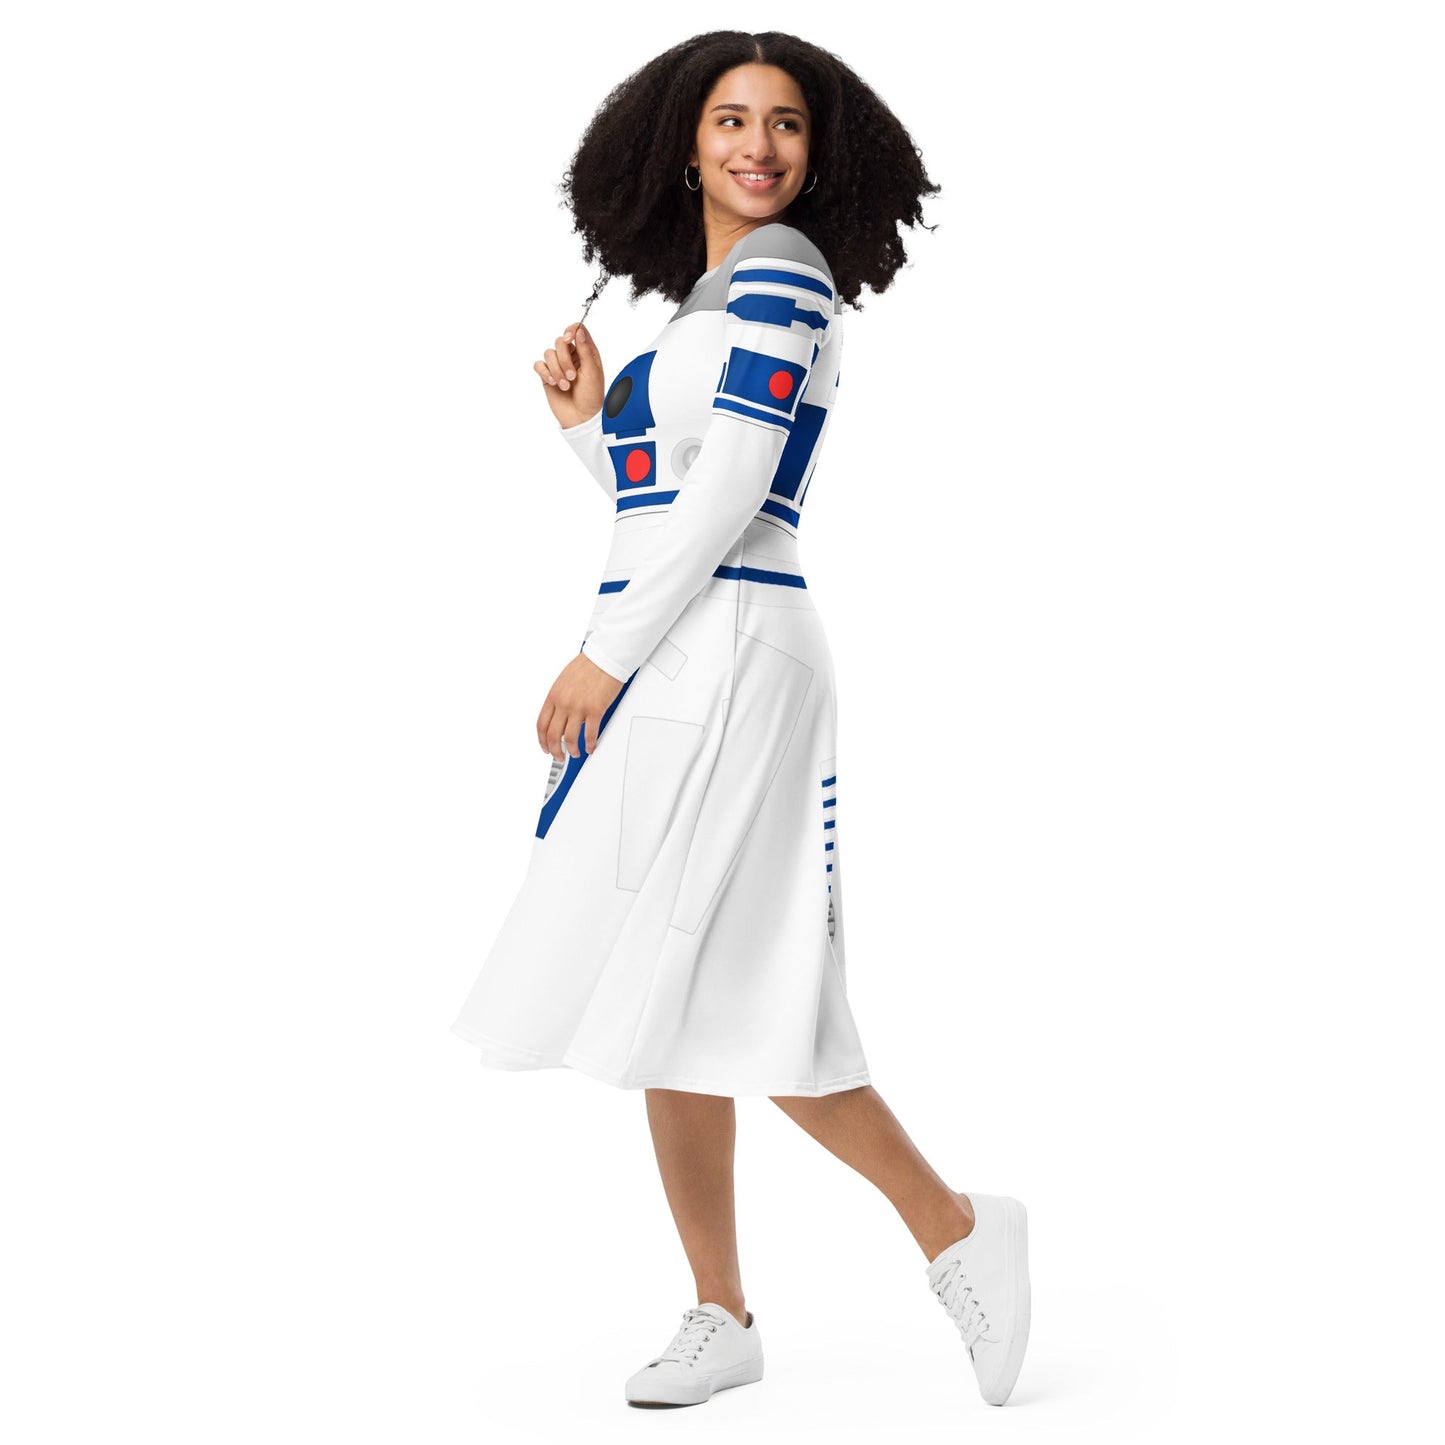 The Droid long sleeve midi dress adult r2d2 costumeboundingWrong Lever Clothing